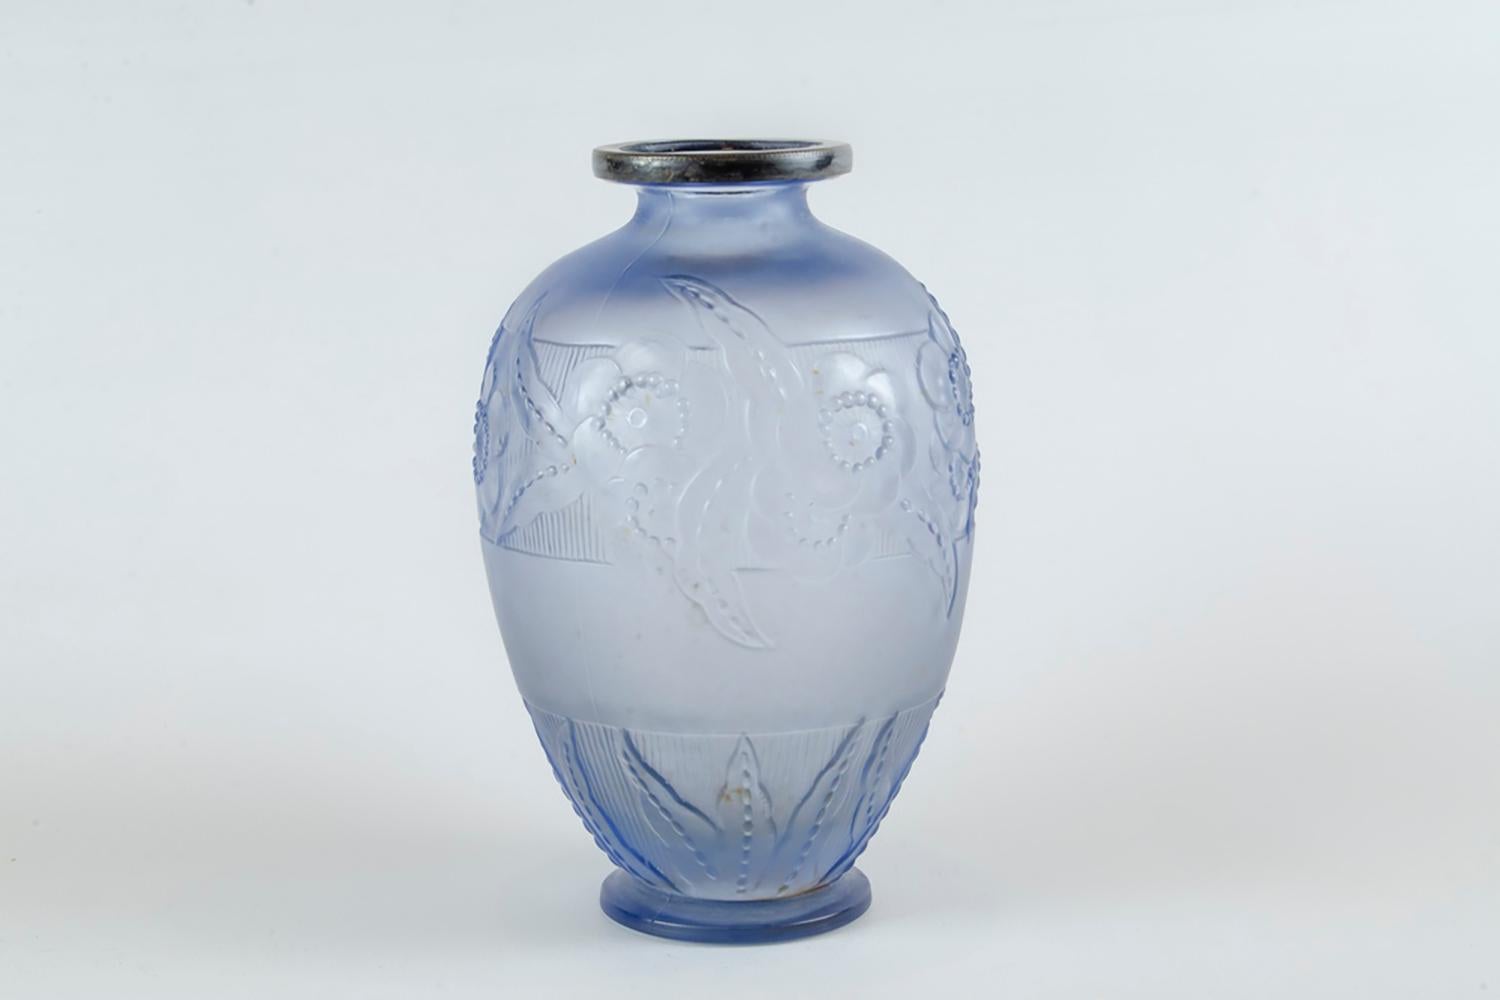 Art Deco Glass Vase by Sabino
Marius Ernest Sabino was born in Sicily (Acireale) in 1878 and settled at the age of 4 in France with his family.

He studies at the National School of Decorative Arts and Fine Arts in Paris, where he is amazed by the